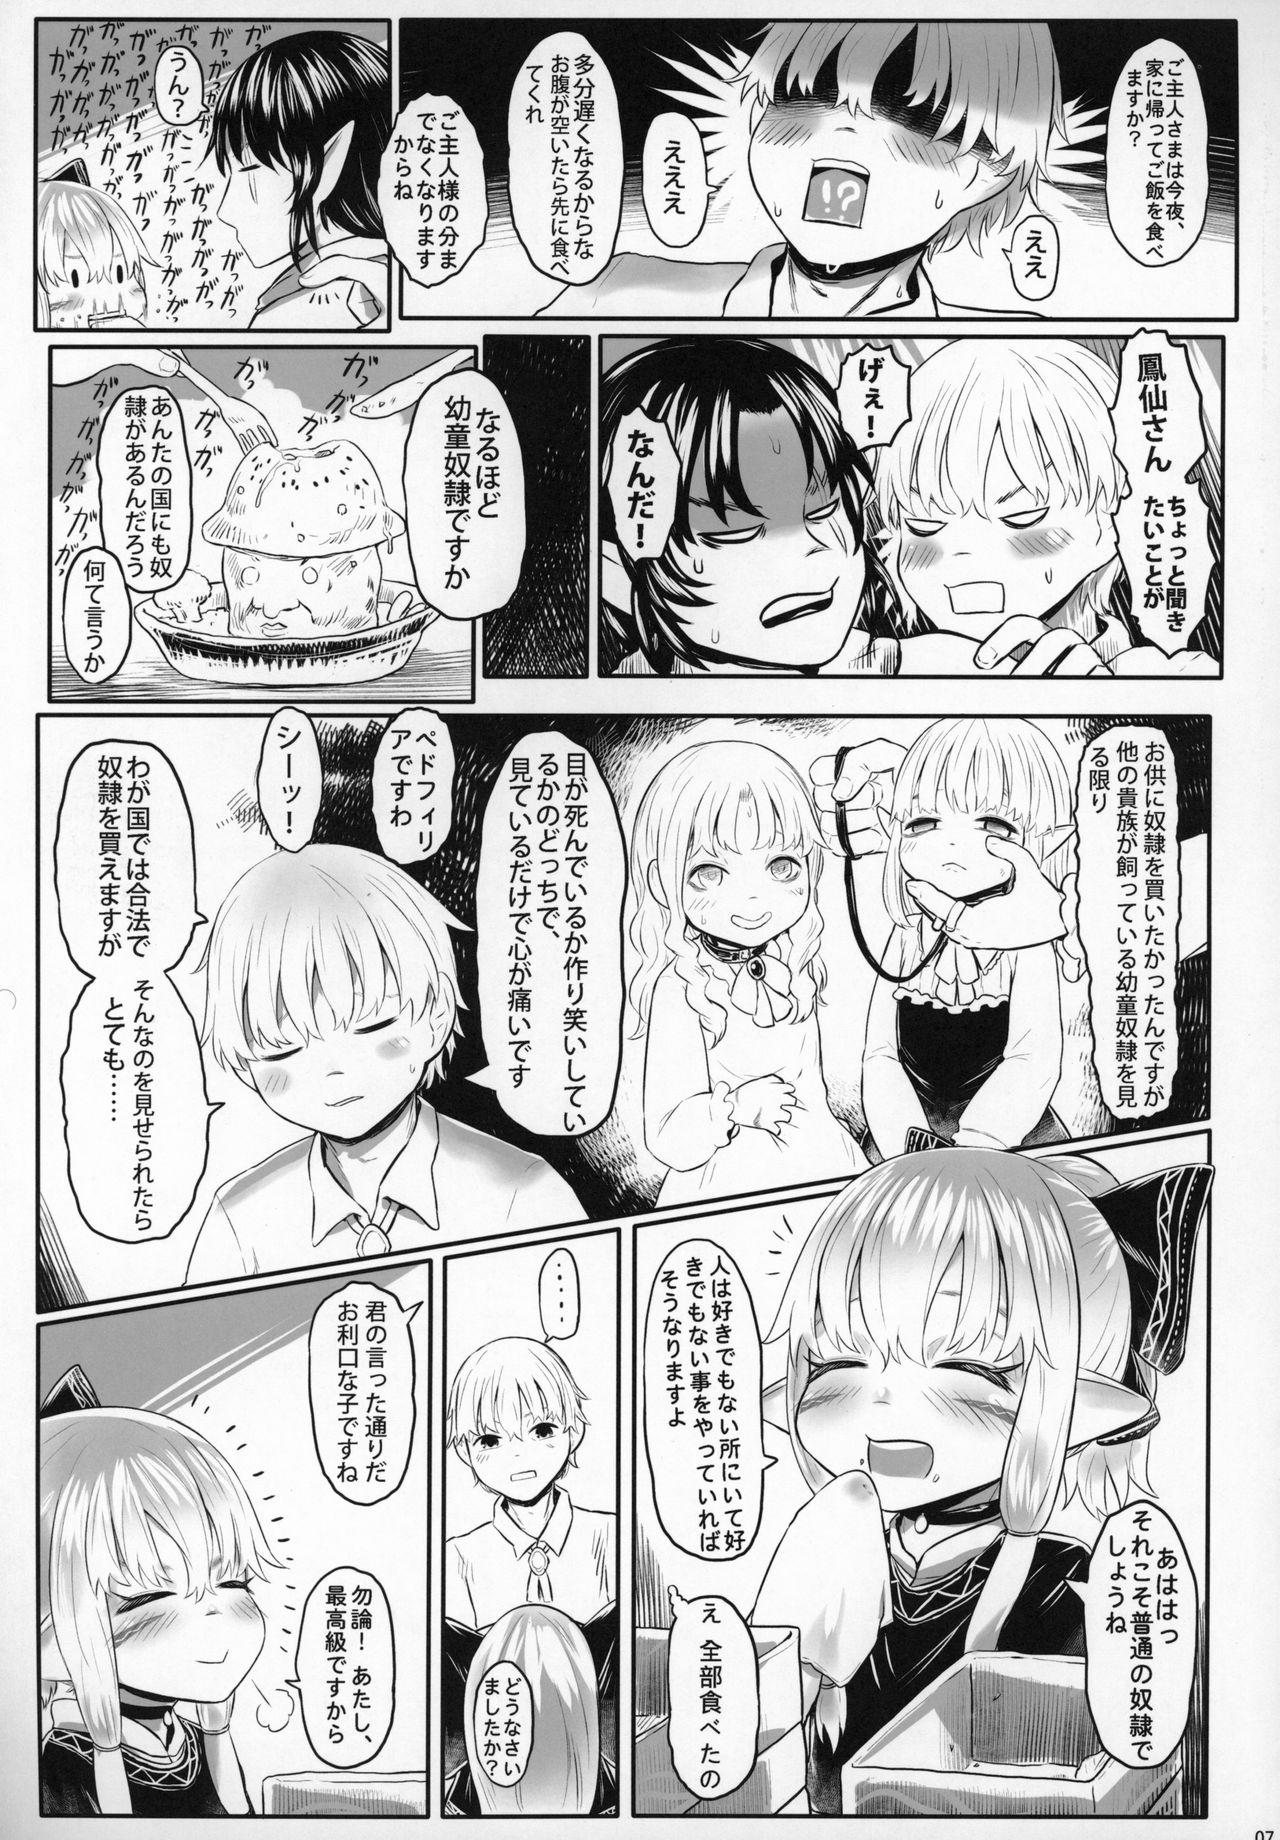 Lovers Aigan Youdo 06 - Original Boots - Page 6